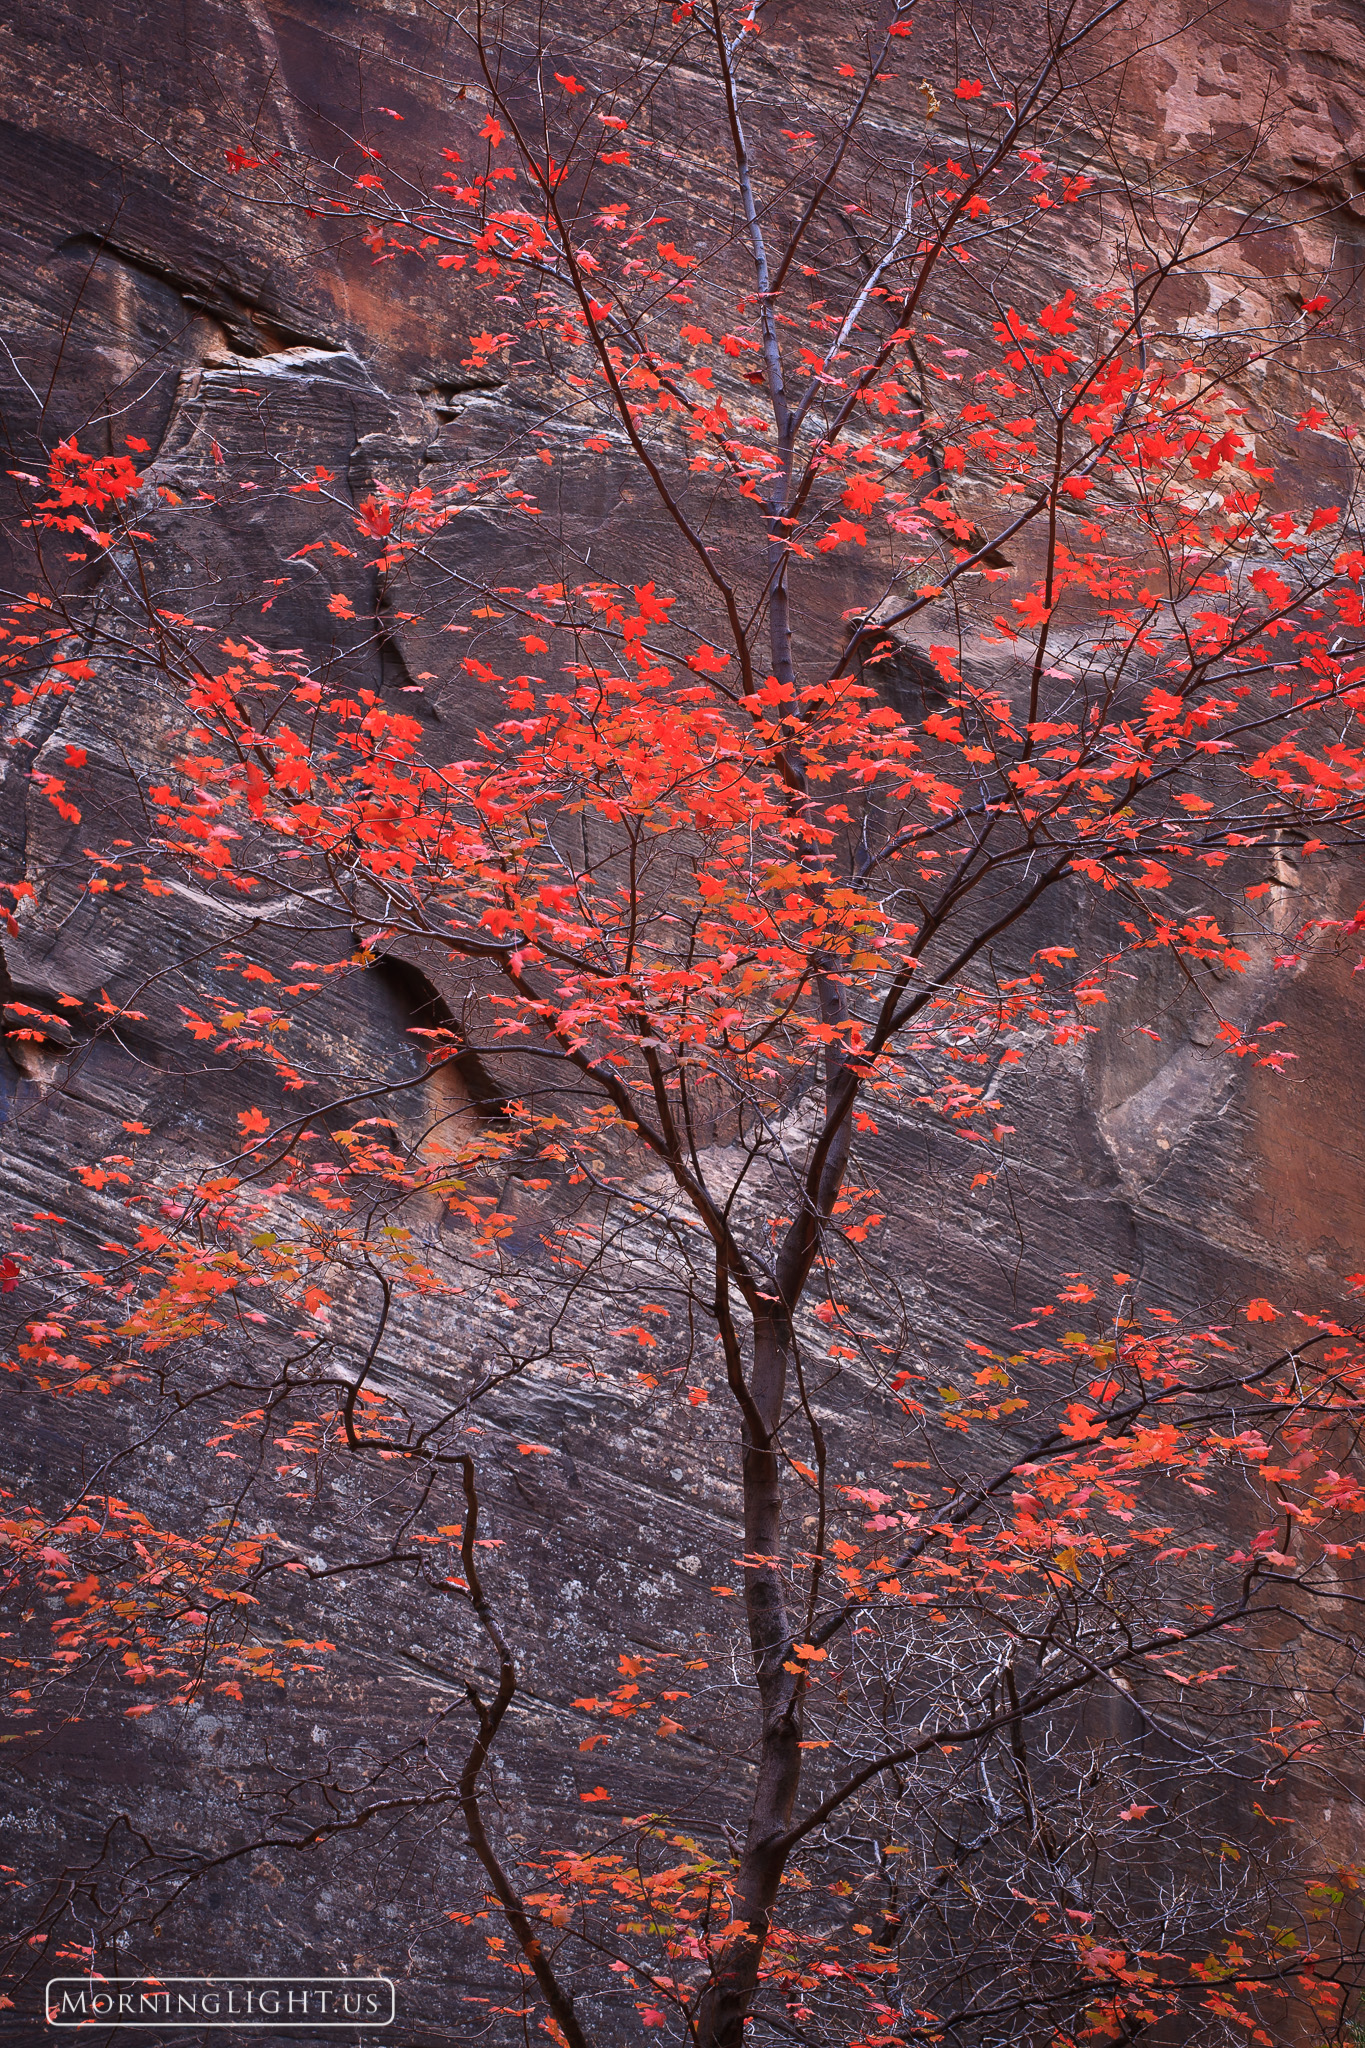 I found this beautiful maple tree while hiking in "The Narrows" of Zion National Park.